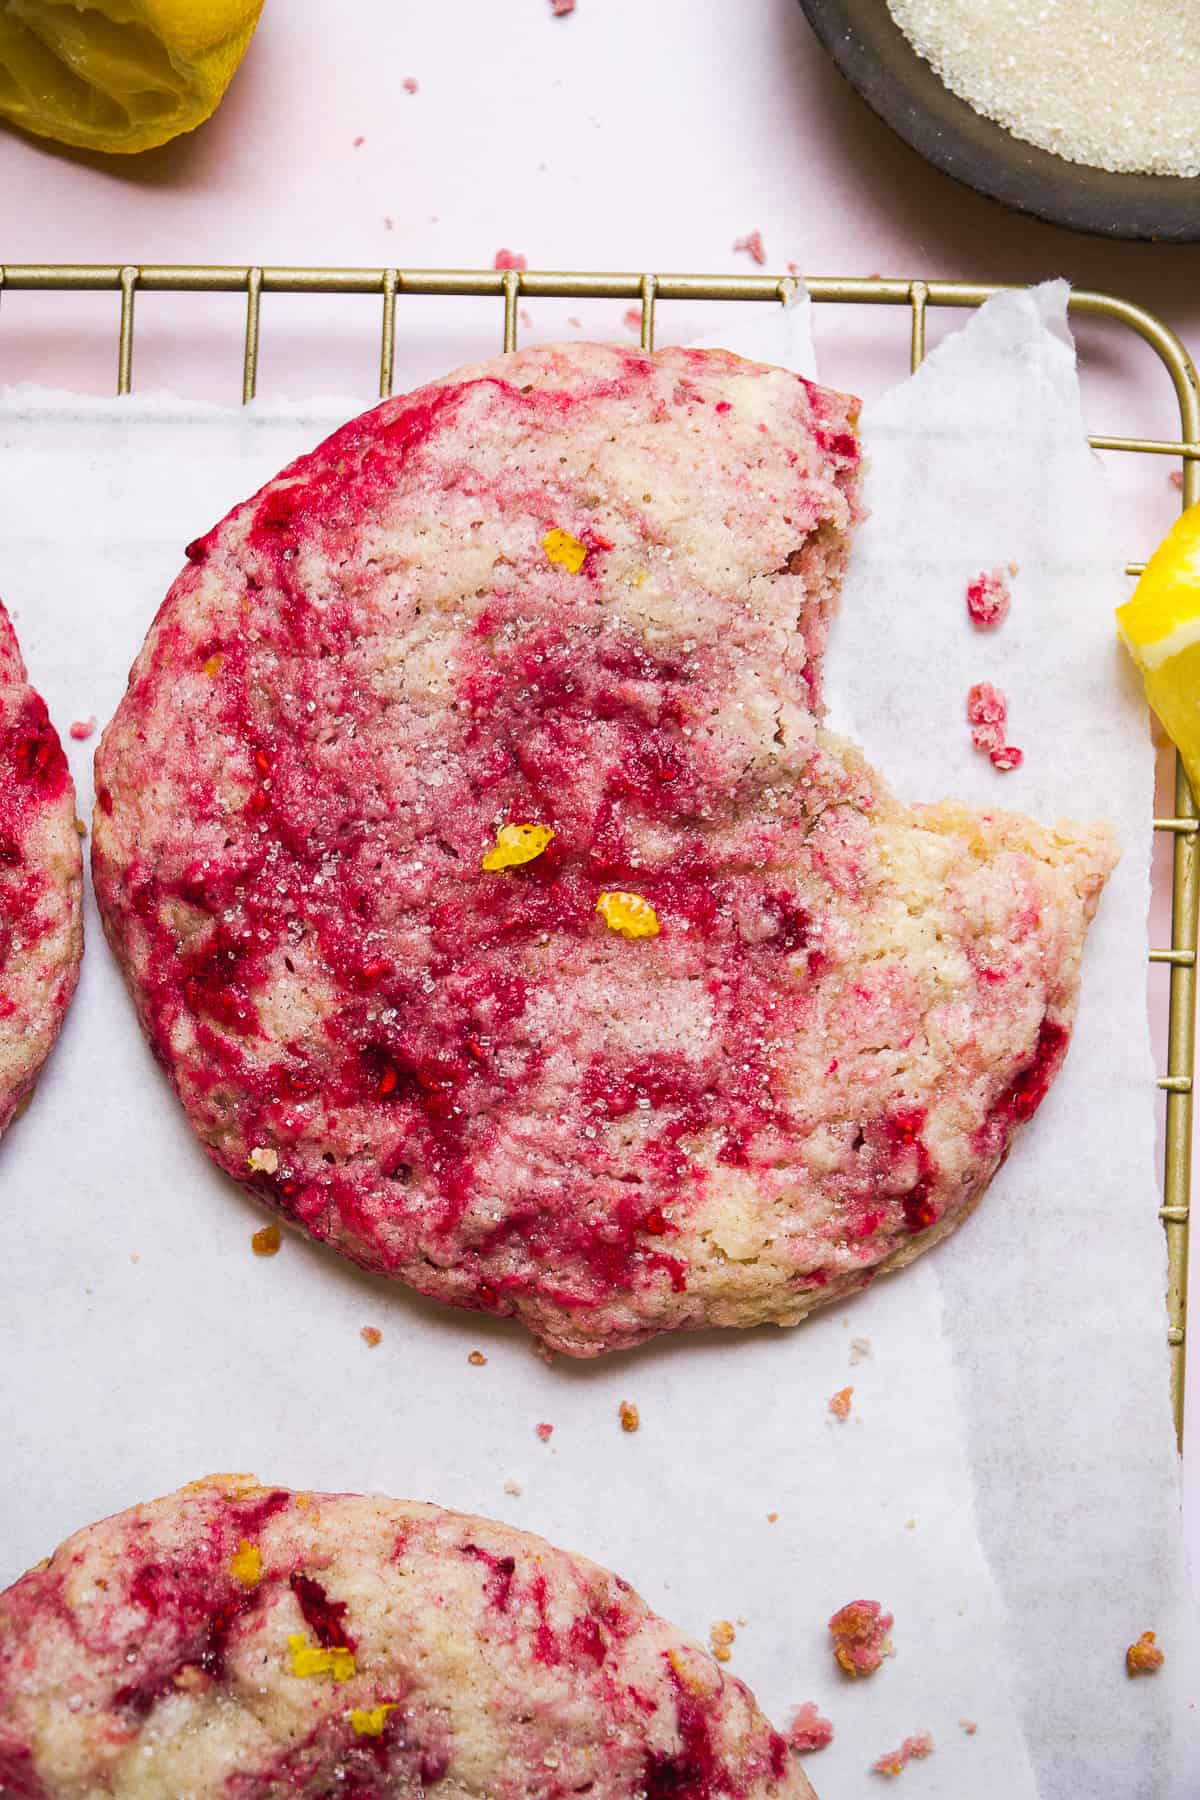 Raspberry lemonade cookie with a bite taken out of it on a wire rack.